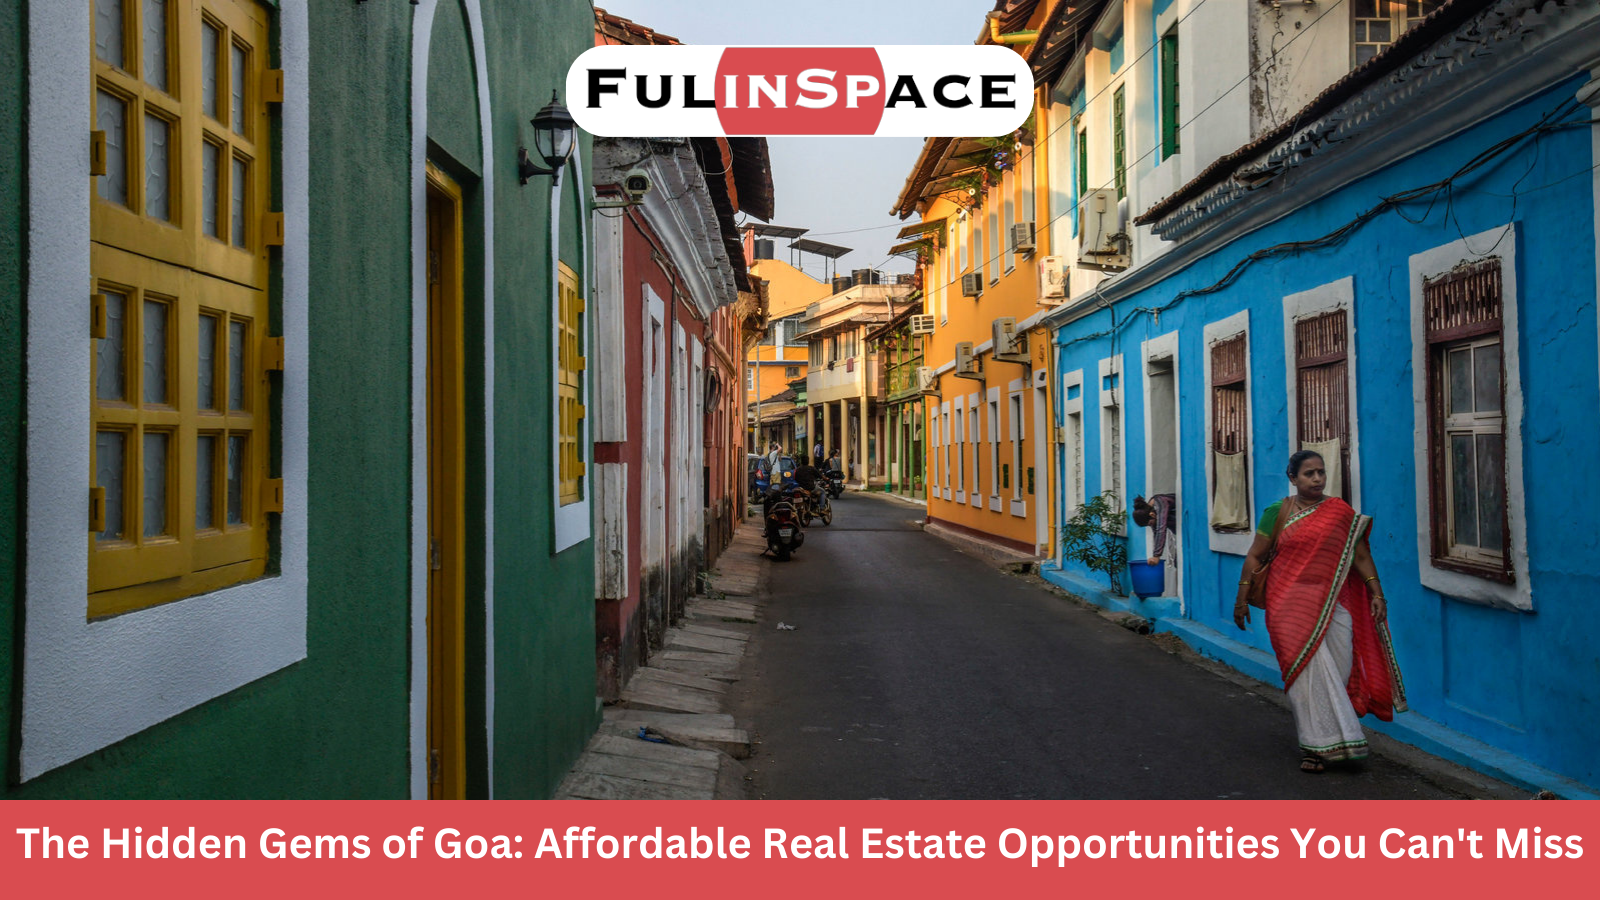 The Hidden Gems of Goa: Affordable Real Estate Opportunities You Can't Miss